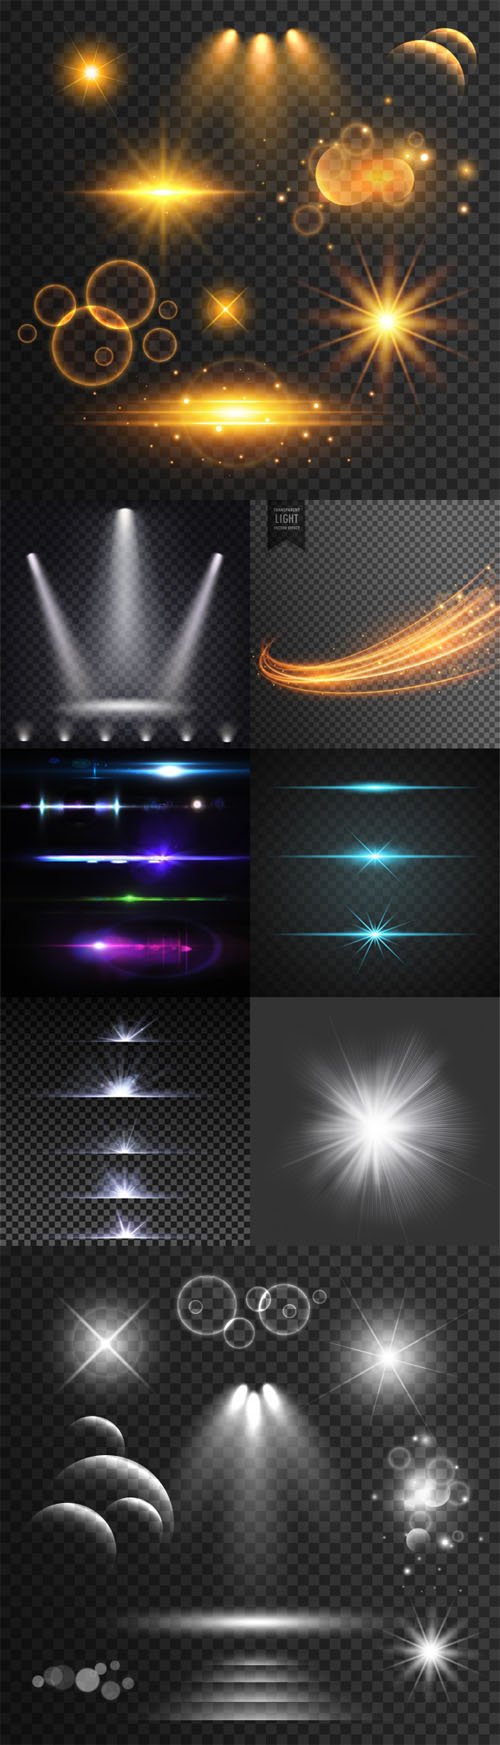 Light Effects Collection in [Ai/EPS/PSD]